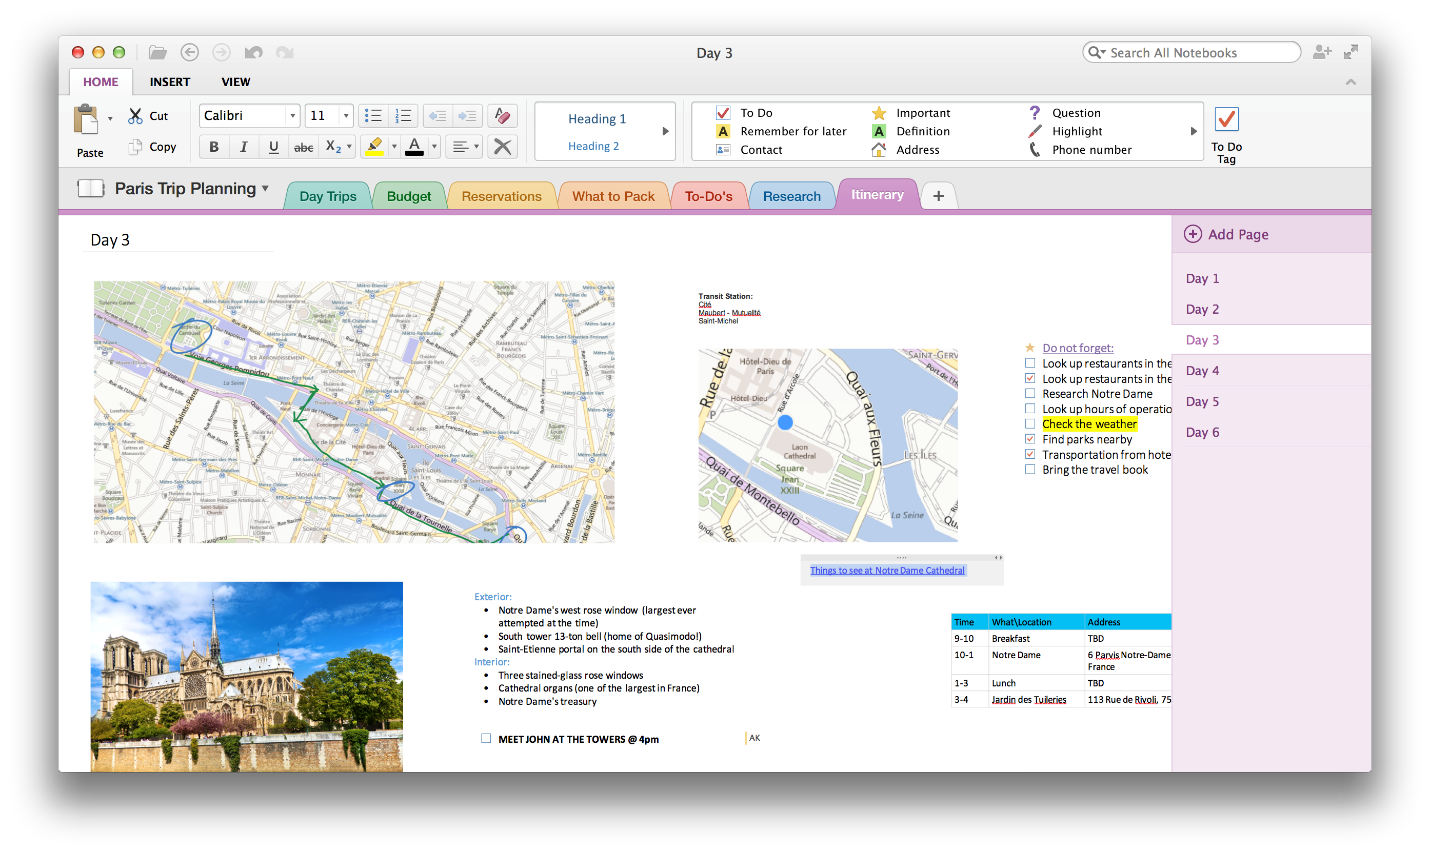 onenote file viewer for mac